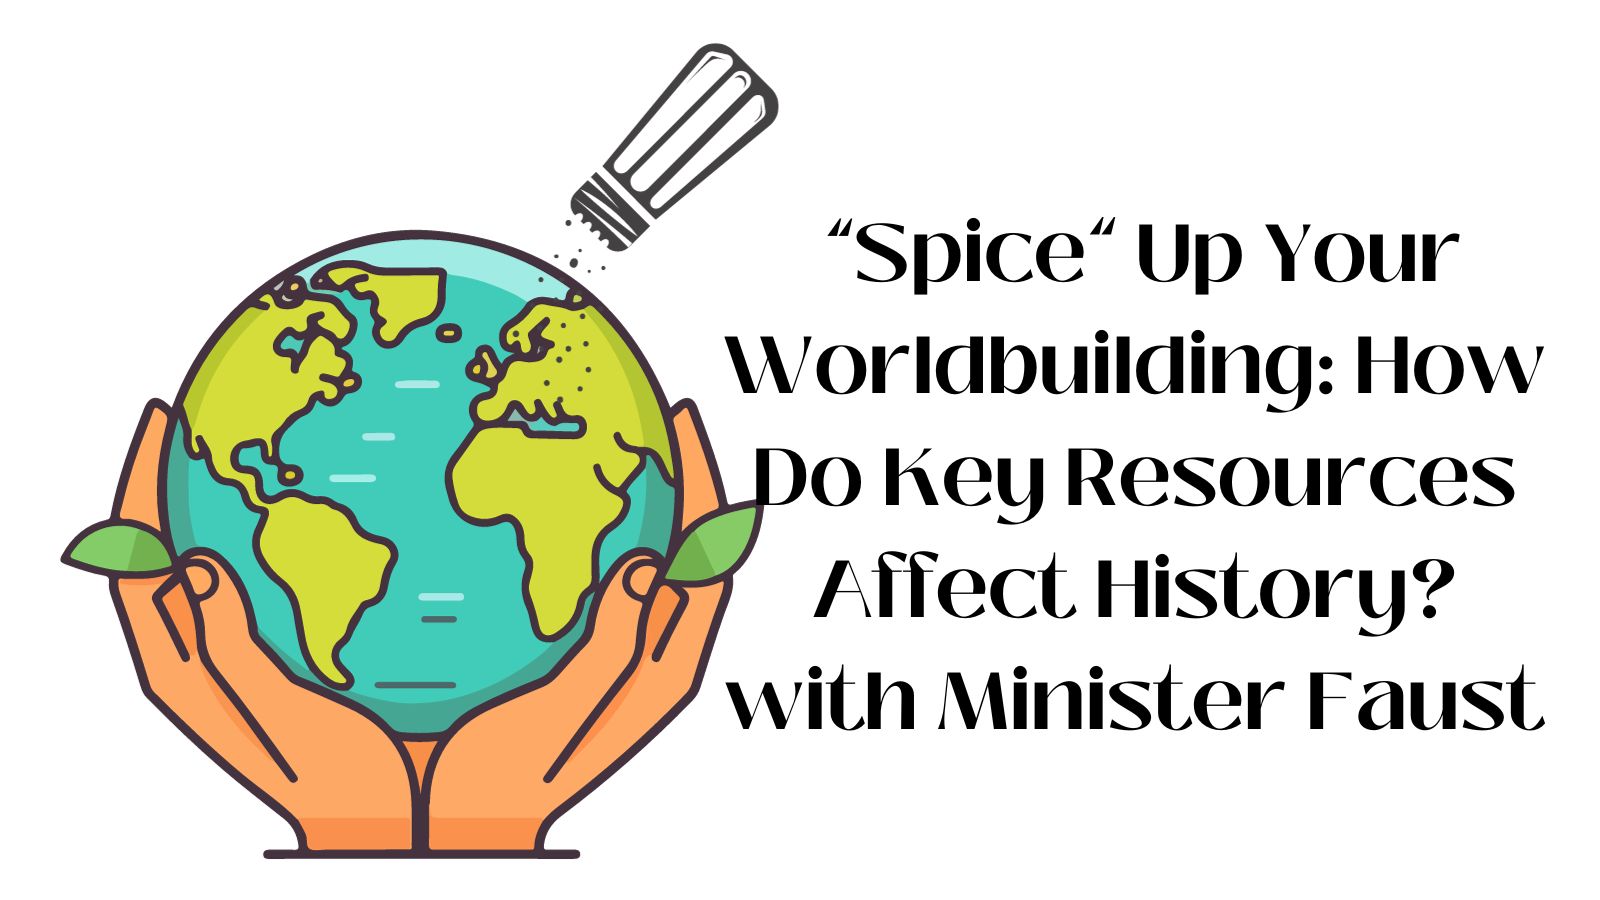 “Spice” Up Your Worldbuilding: How Do Key Resources Affect History? with Minister Faust